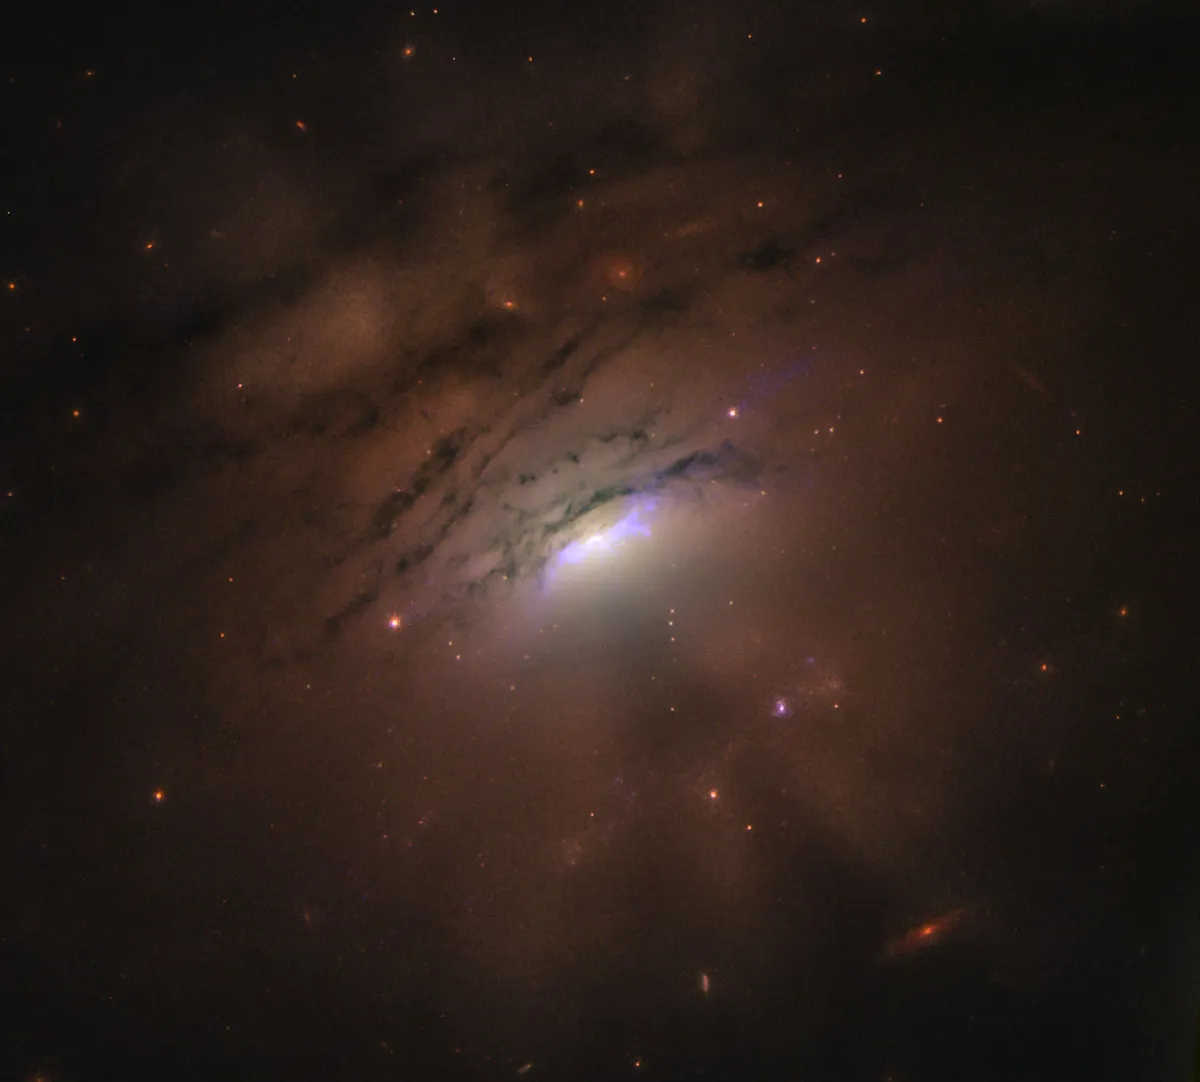 Cone-shaped shadows emanating from the bright centre of galaxy IC 5063 could be cast by the dusty ring surrounding the supermassive black hole at its centre. Credit: NASA, ESA, STScI and W.P. Maksym (CfA)